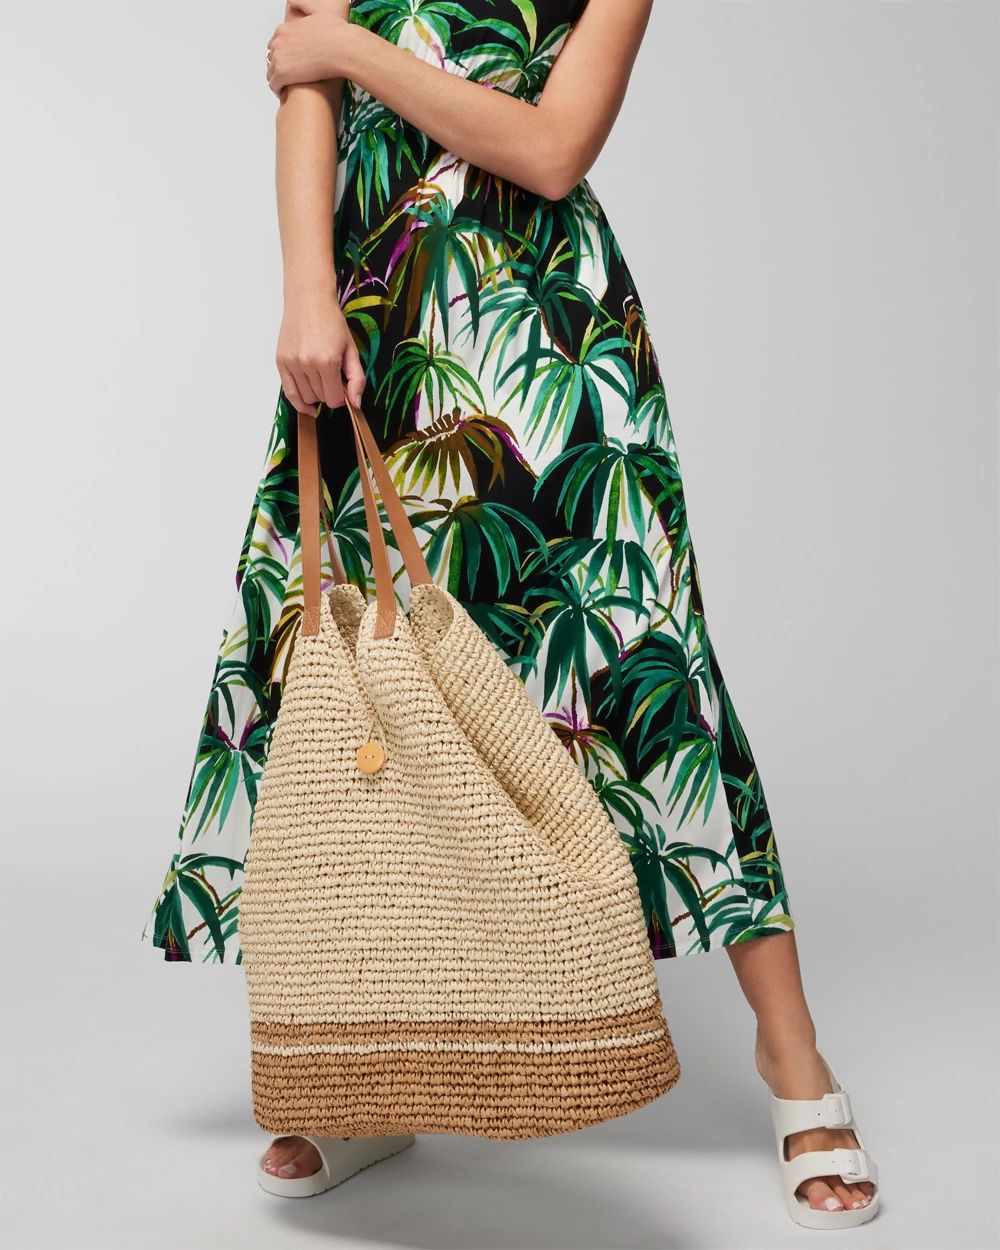 Soma<sup class=st-superscript>®</sup> model wearing a white, black, and green palm print bra dress, white slide sandals, and a tan oversized beach bag.